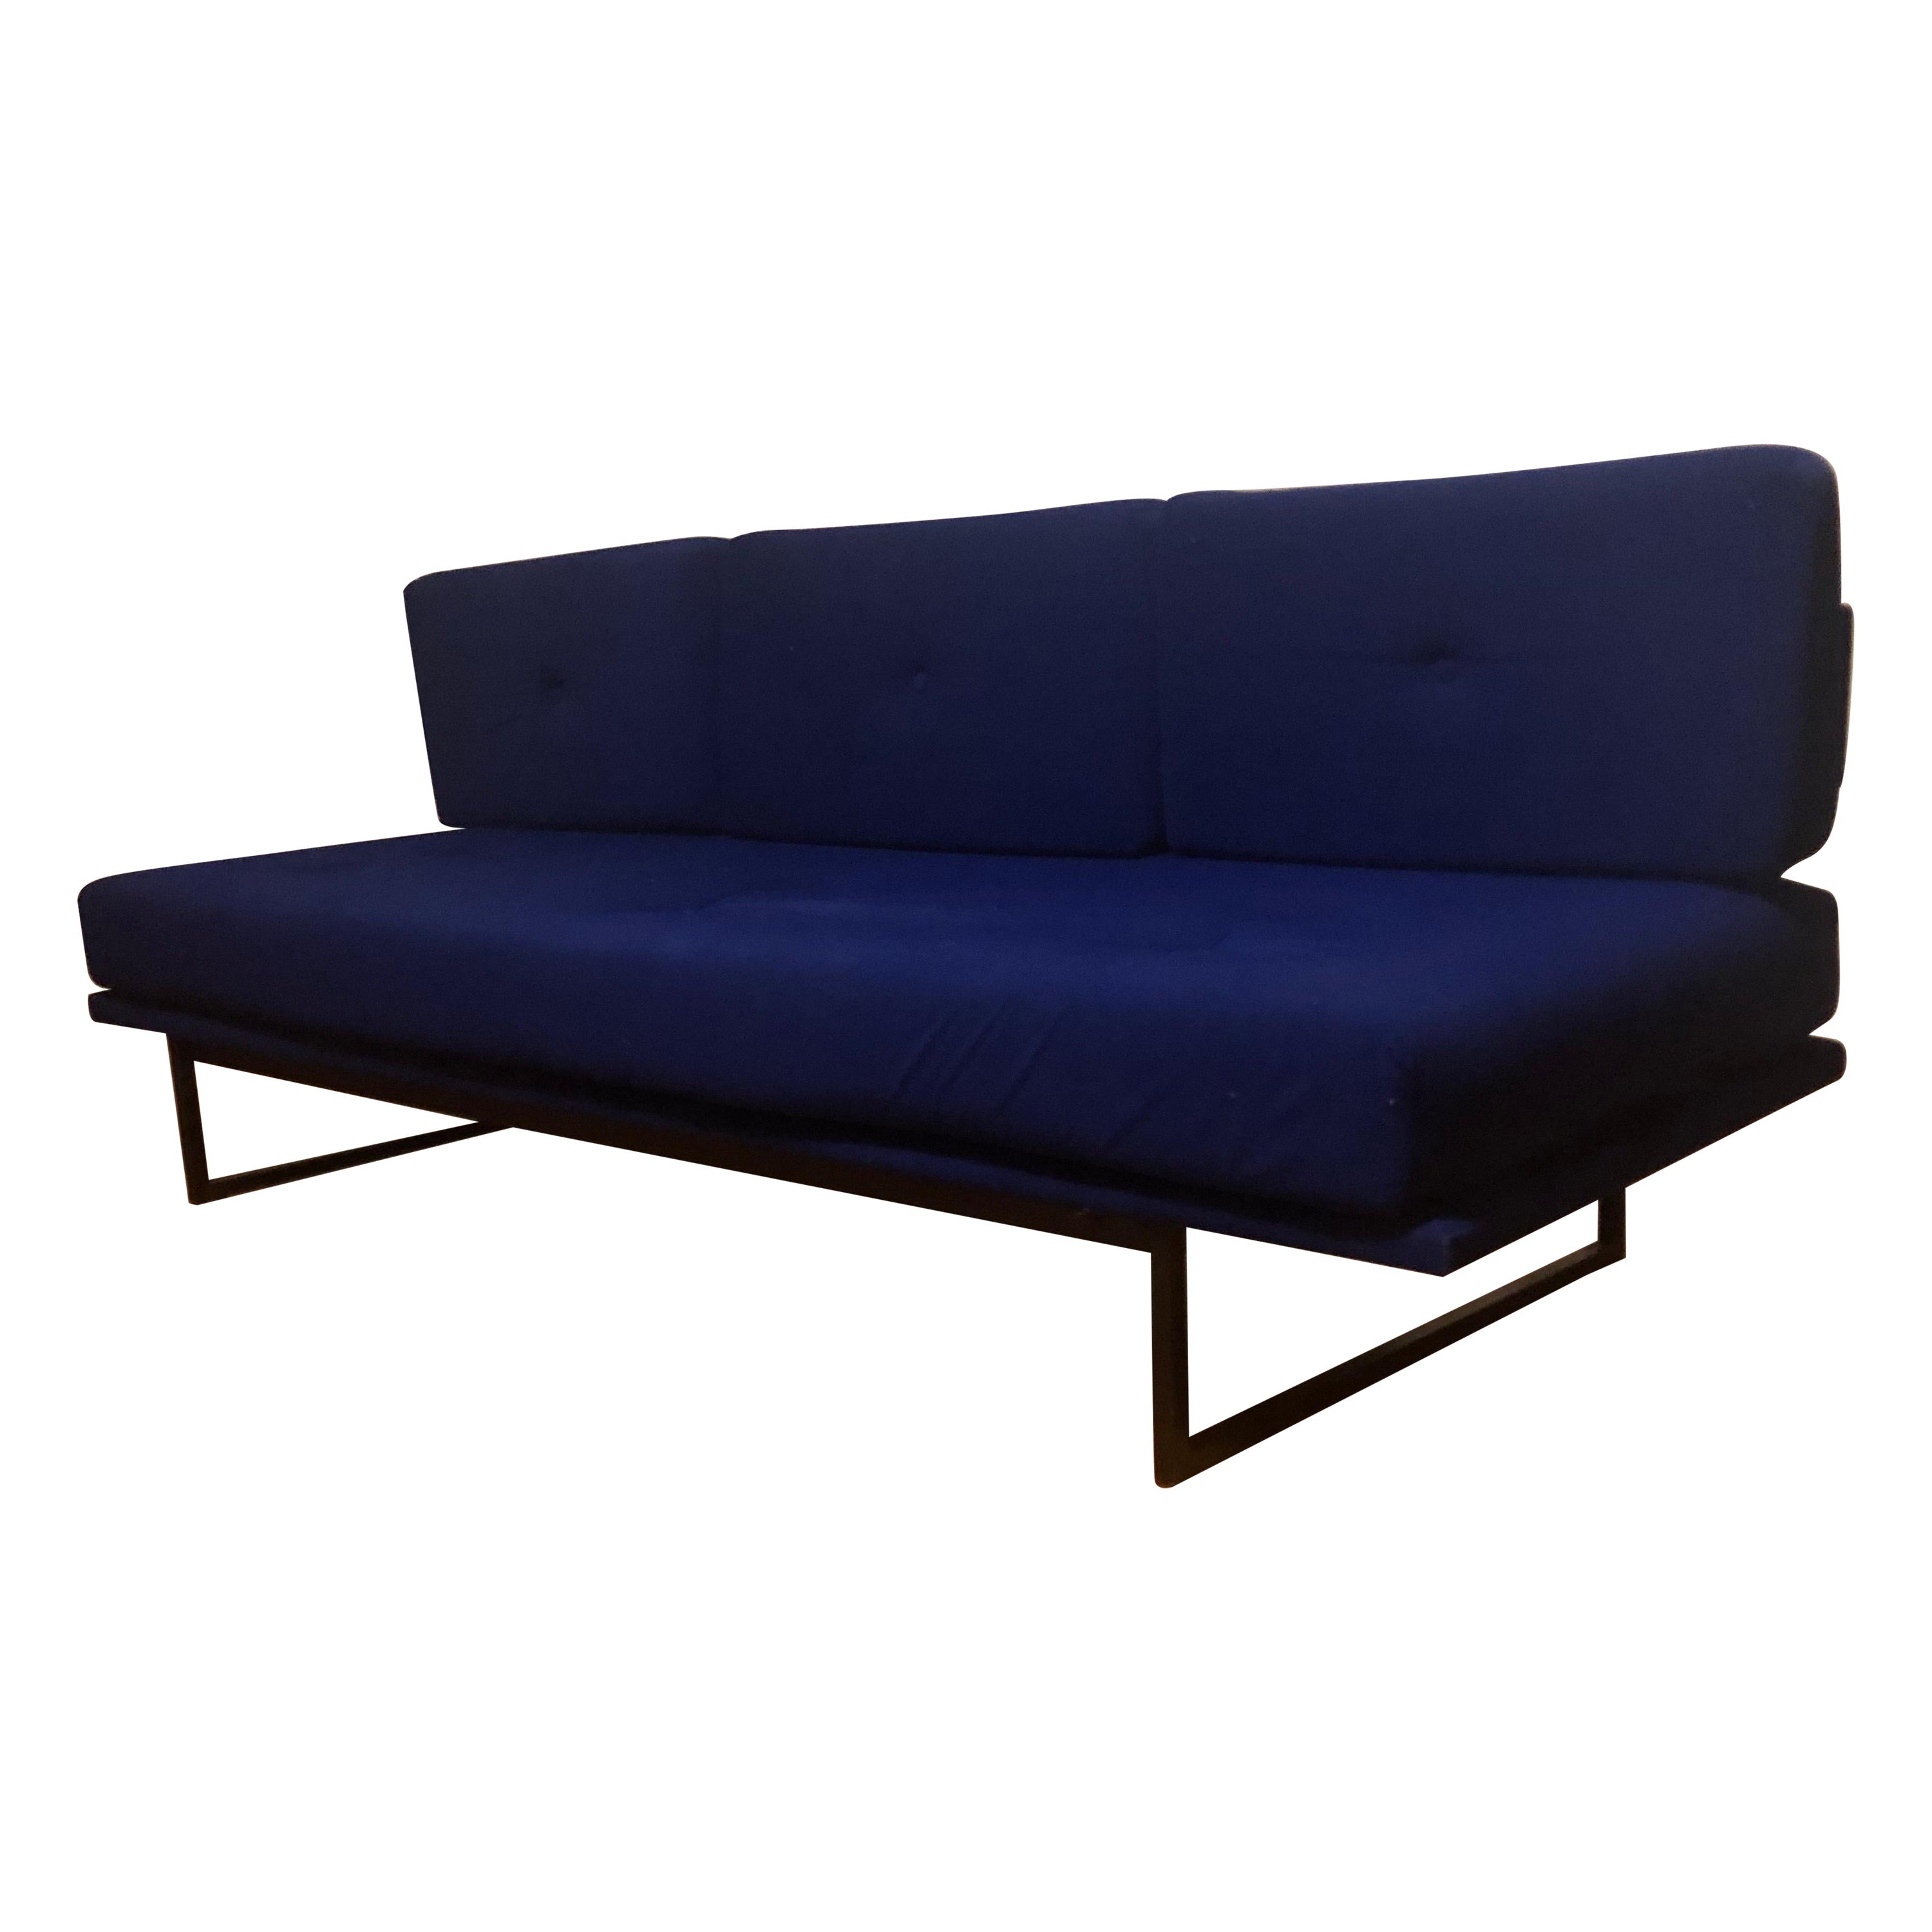 French Mid-Century Modern Sofa / Day Bed by A.R.P.